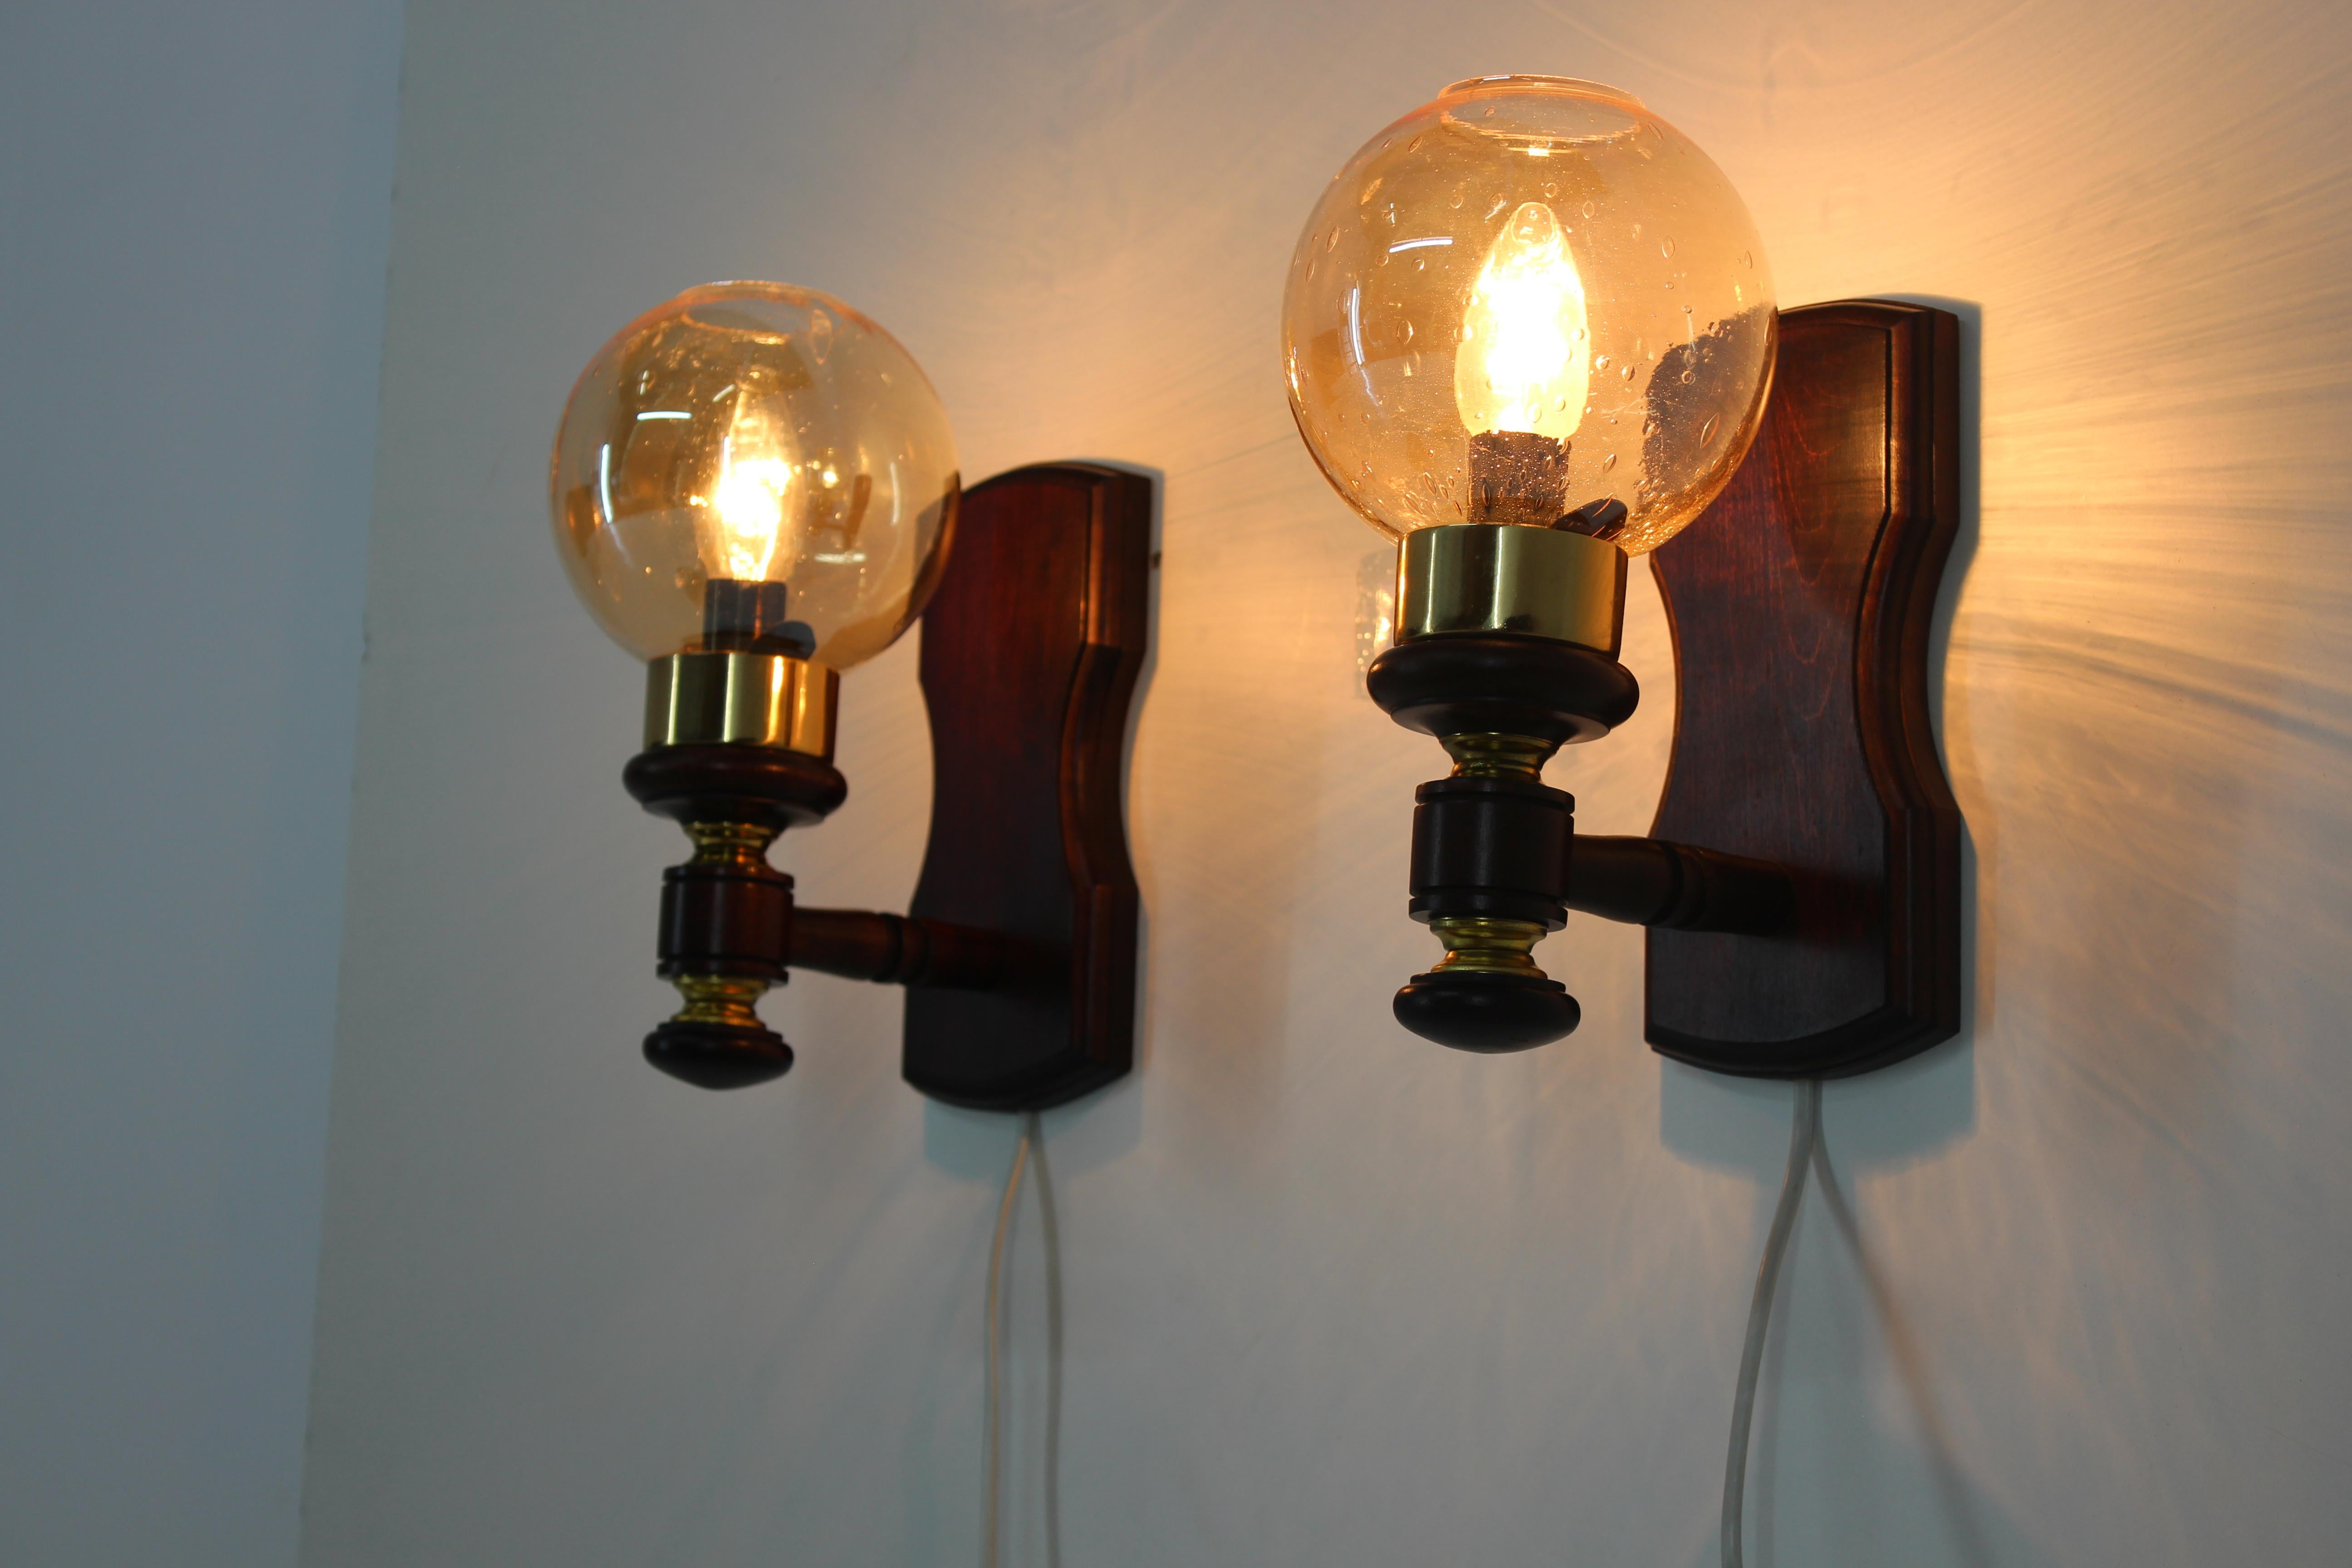 Pair of Midcentury Wall Lamps/Pokrok Žilina, 1970 In Good Condition For Sale In Praha, CZ